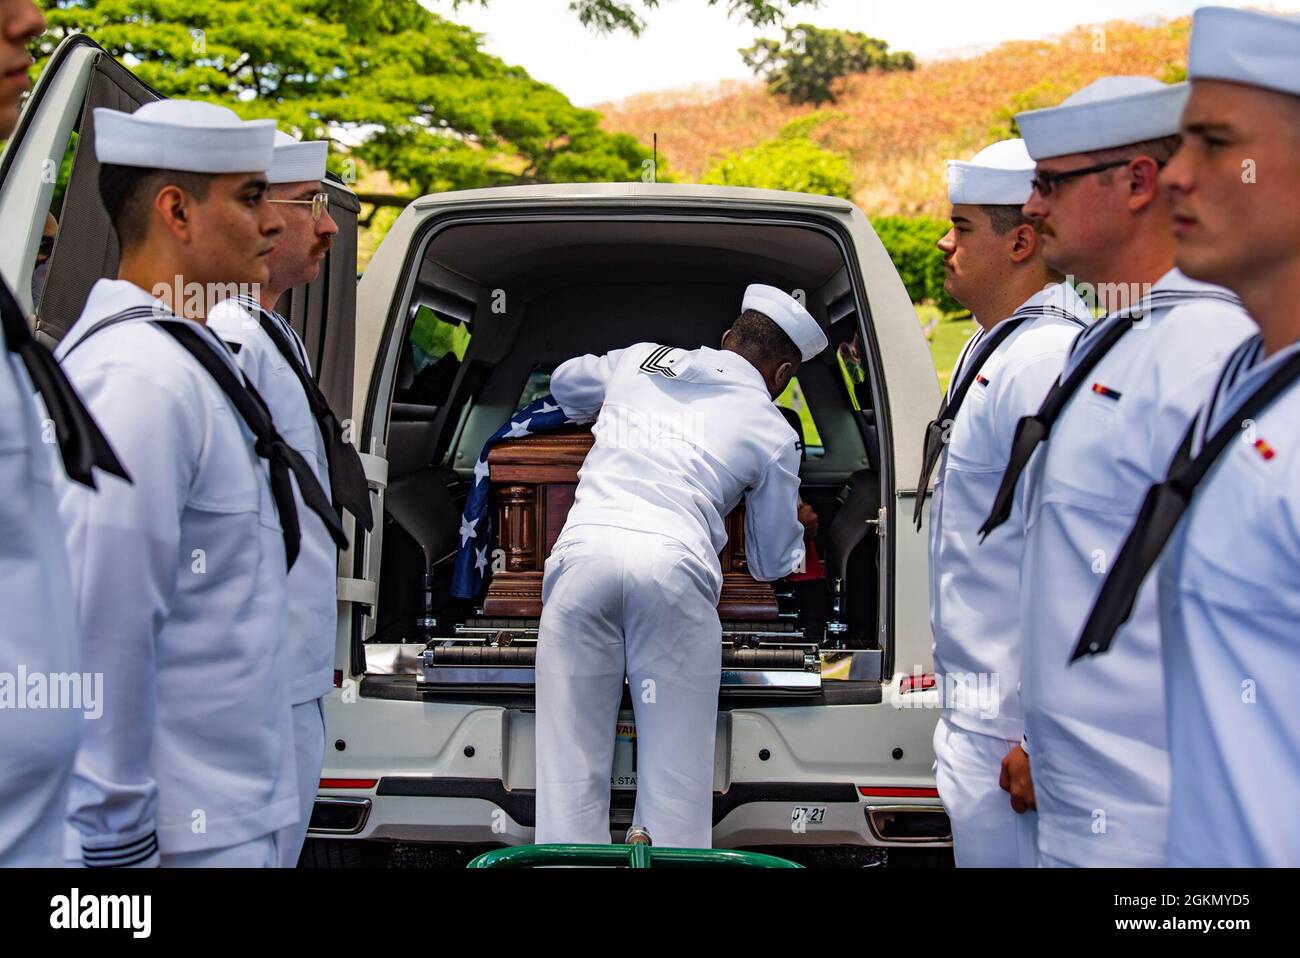 Sailors assigned to Navy Region Hawaii and the Defense POW/MIA Accounting Agency (DPAA) conduct a funeral for U.S. Navy Navy Seaman 1st Class Camillus M. O’Grady, 19, of Greenleaf, Kansas, at the National Memorial Cemetery of the Pacific, Honolulu, Hawaii, June 1, 2021. O’Grady was assigned to the USS Oklahoma, which sustained fire from Japanese aircraft and multiple torpedo hits causing the ship to capsize and resulted in the deaths of more than 400 crew members on Dec. 7, 1941, at Ford Island, Pearl Harbor. O’Grady was recently identified through DNA analysis by the DPAA forensic laboratory Stock Photo